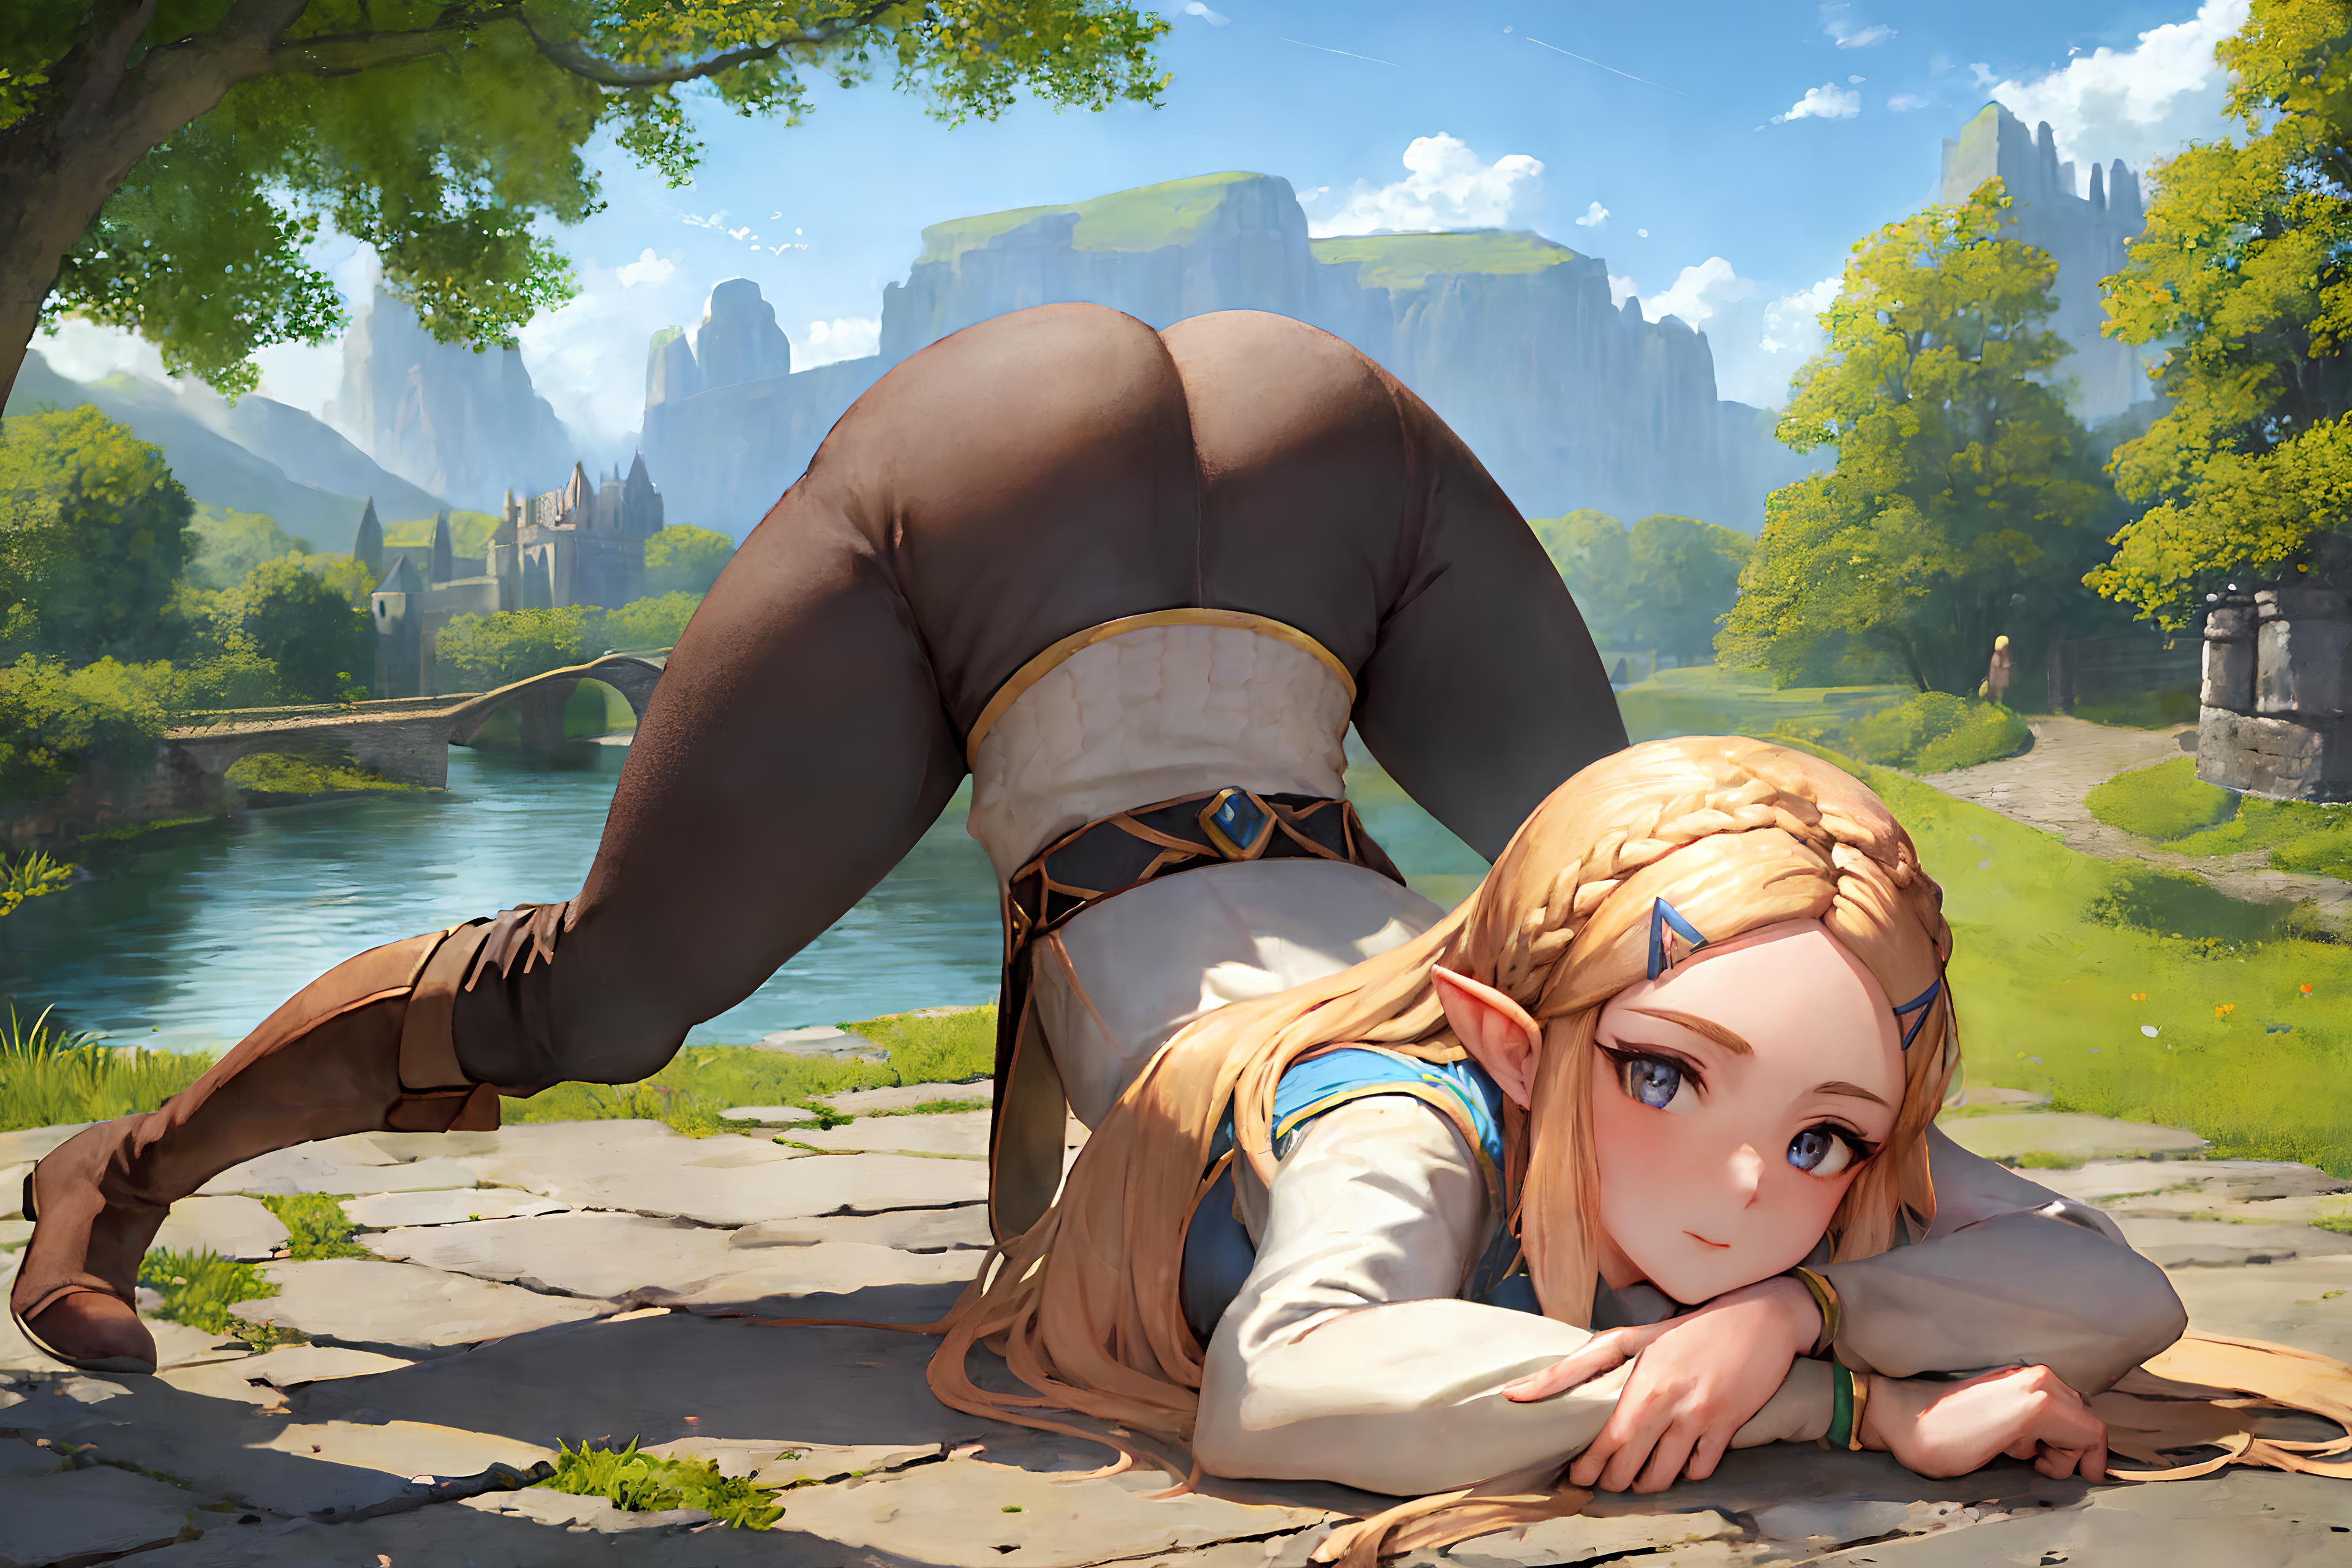 A beautiful cartoon elf girl wearing a white dress and blue hair is lying on her back on some stone ground.